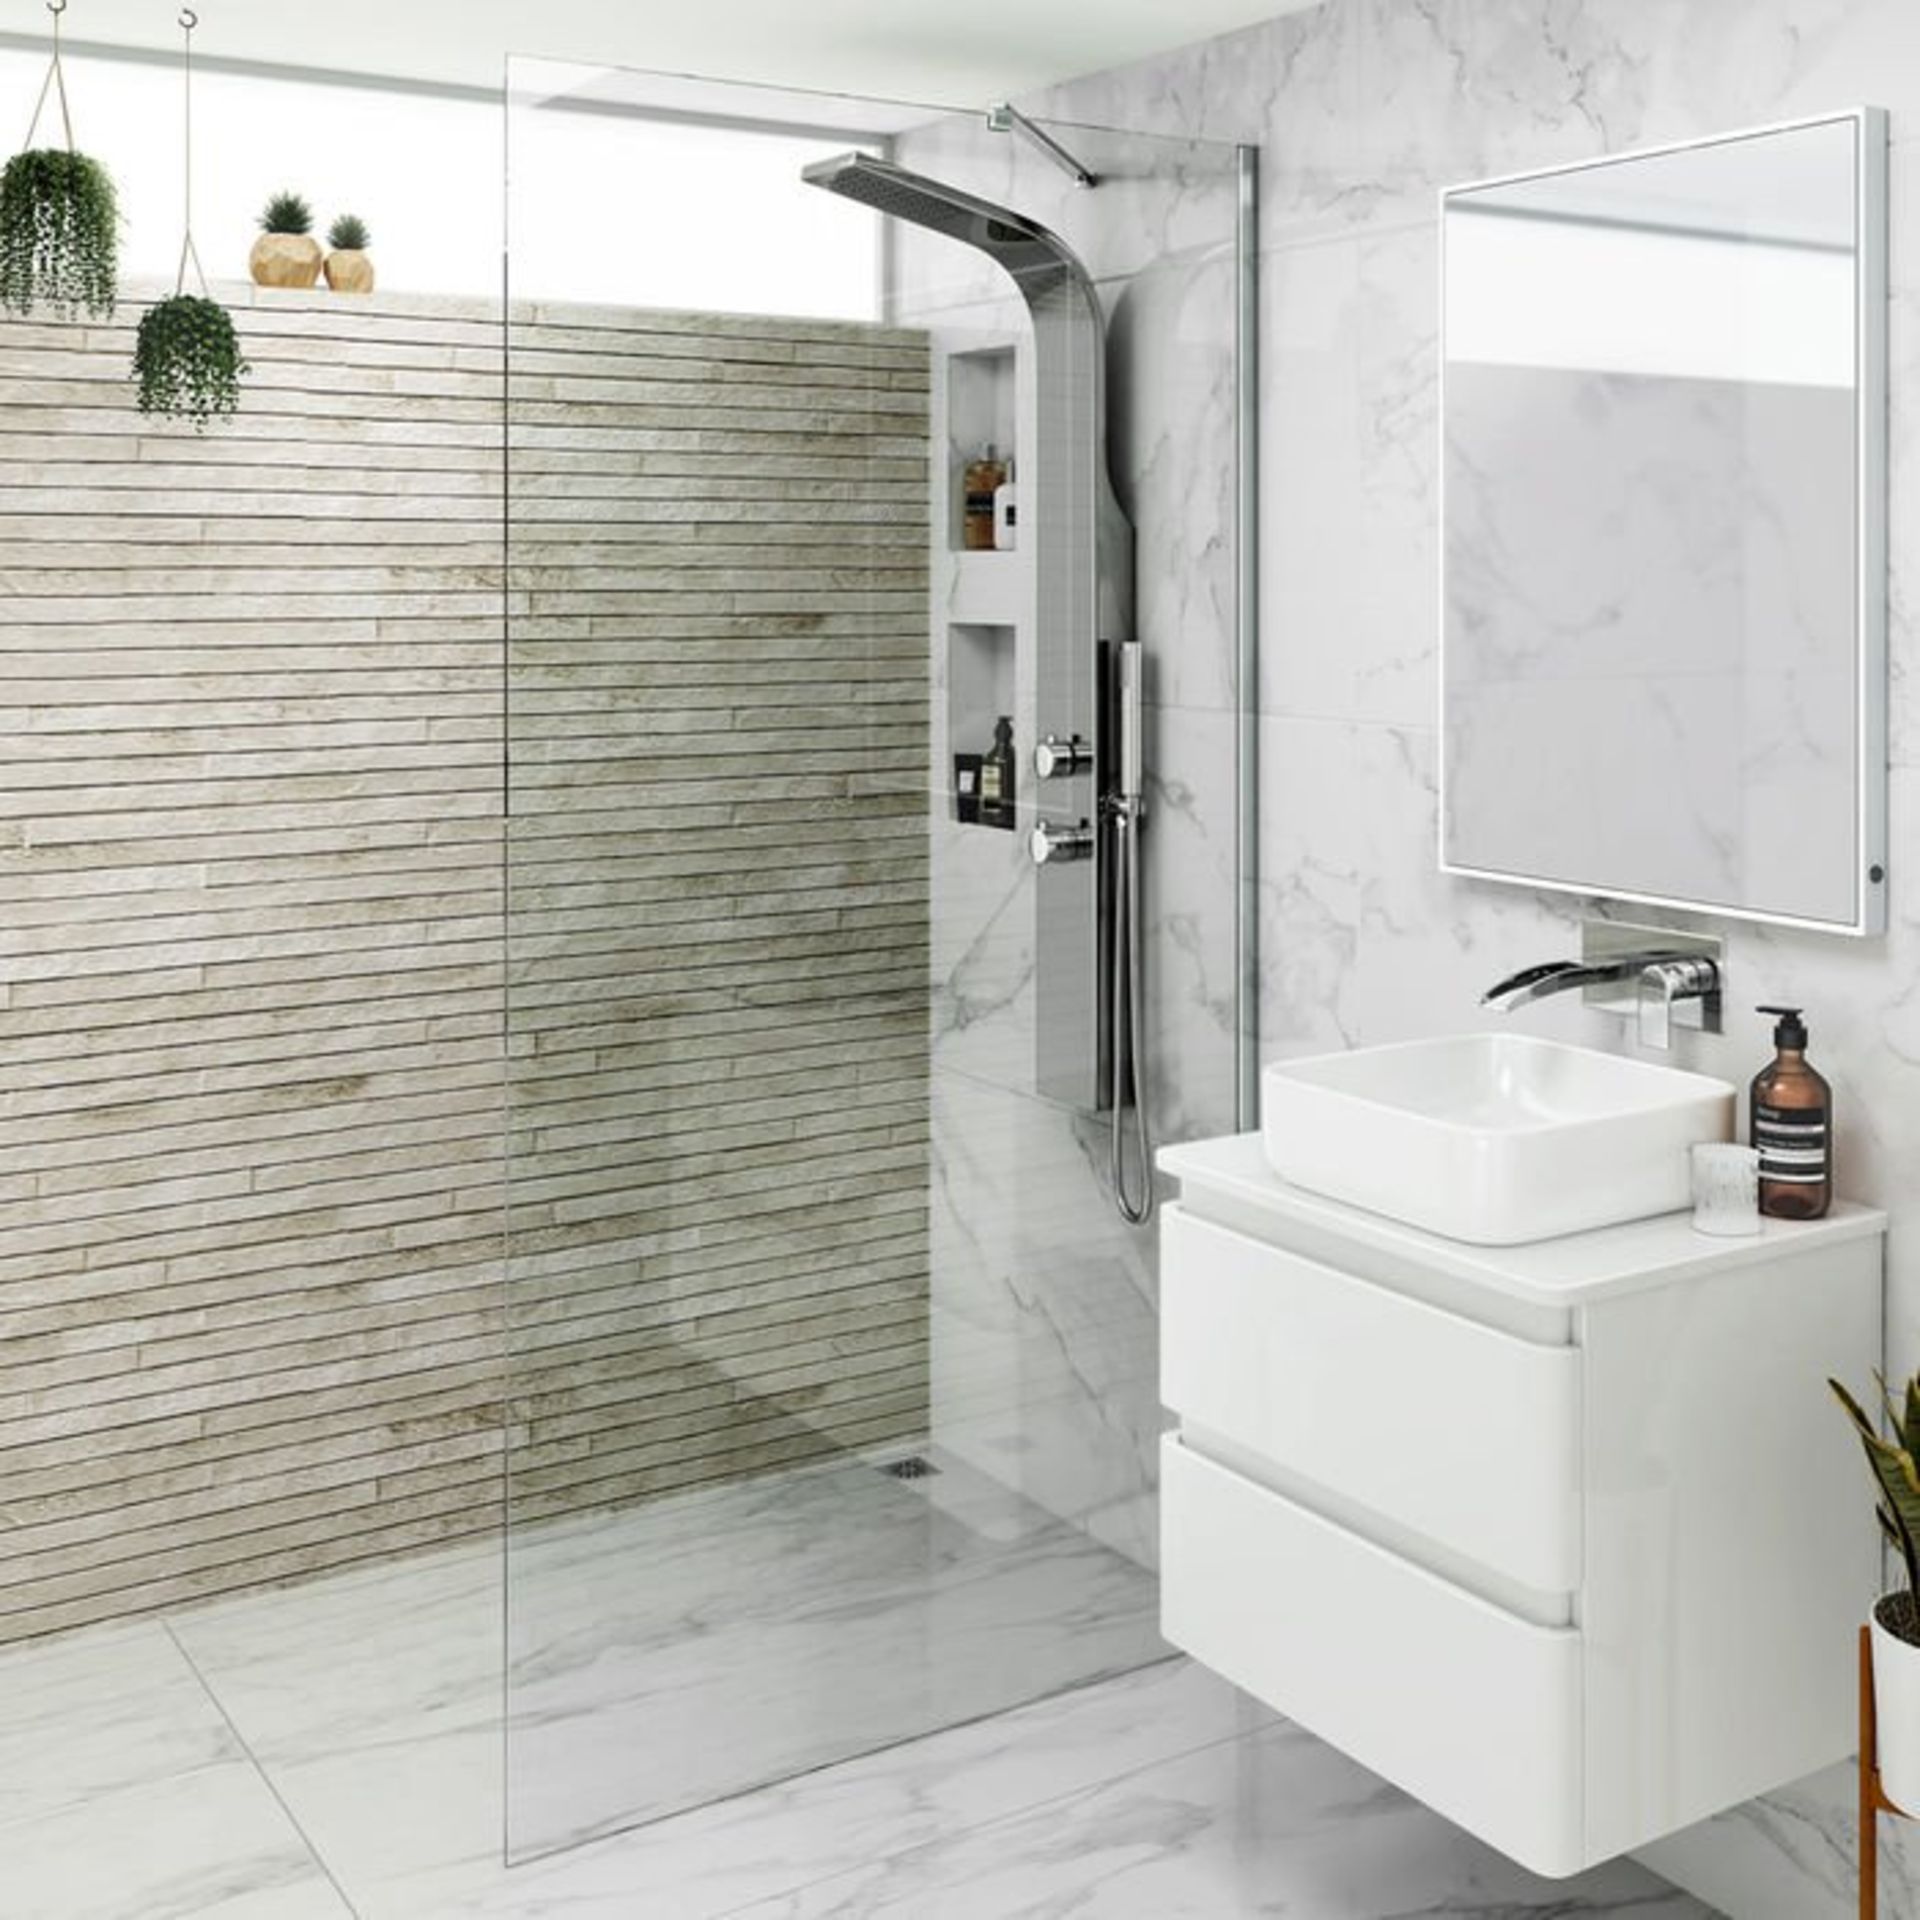 (G89) 900mm - 8mm - Premium EasyClean Wetroom Panel RRP £399.99 8mm EasyClean glass - Our glass - Image 2 of 7